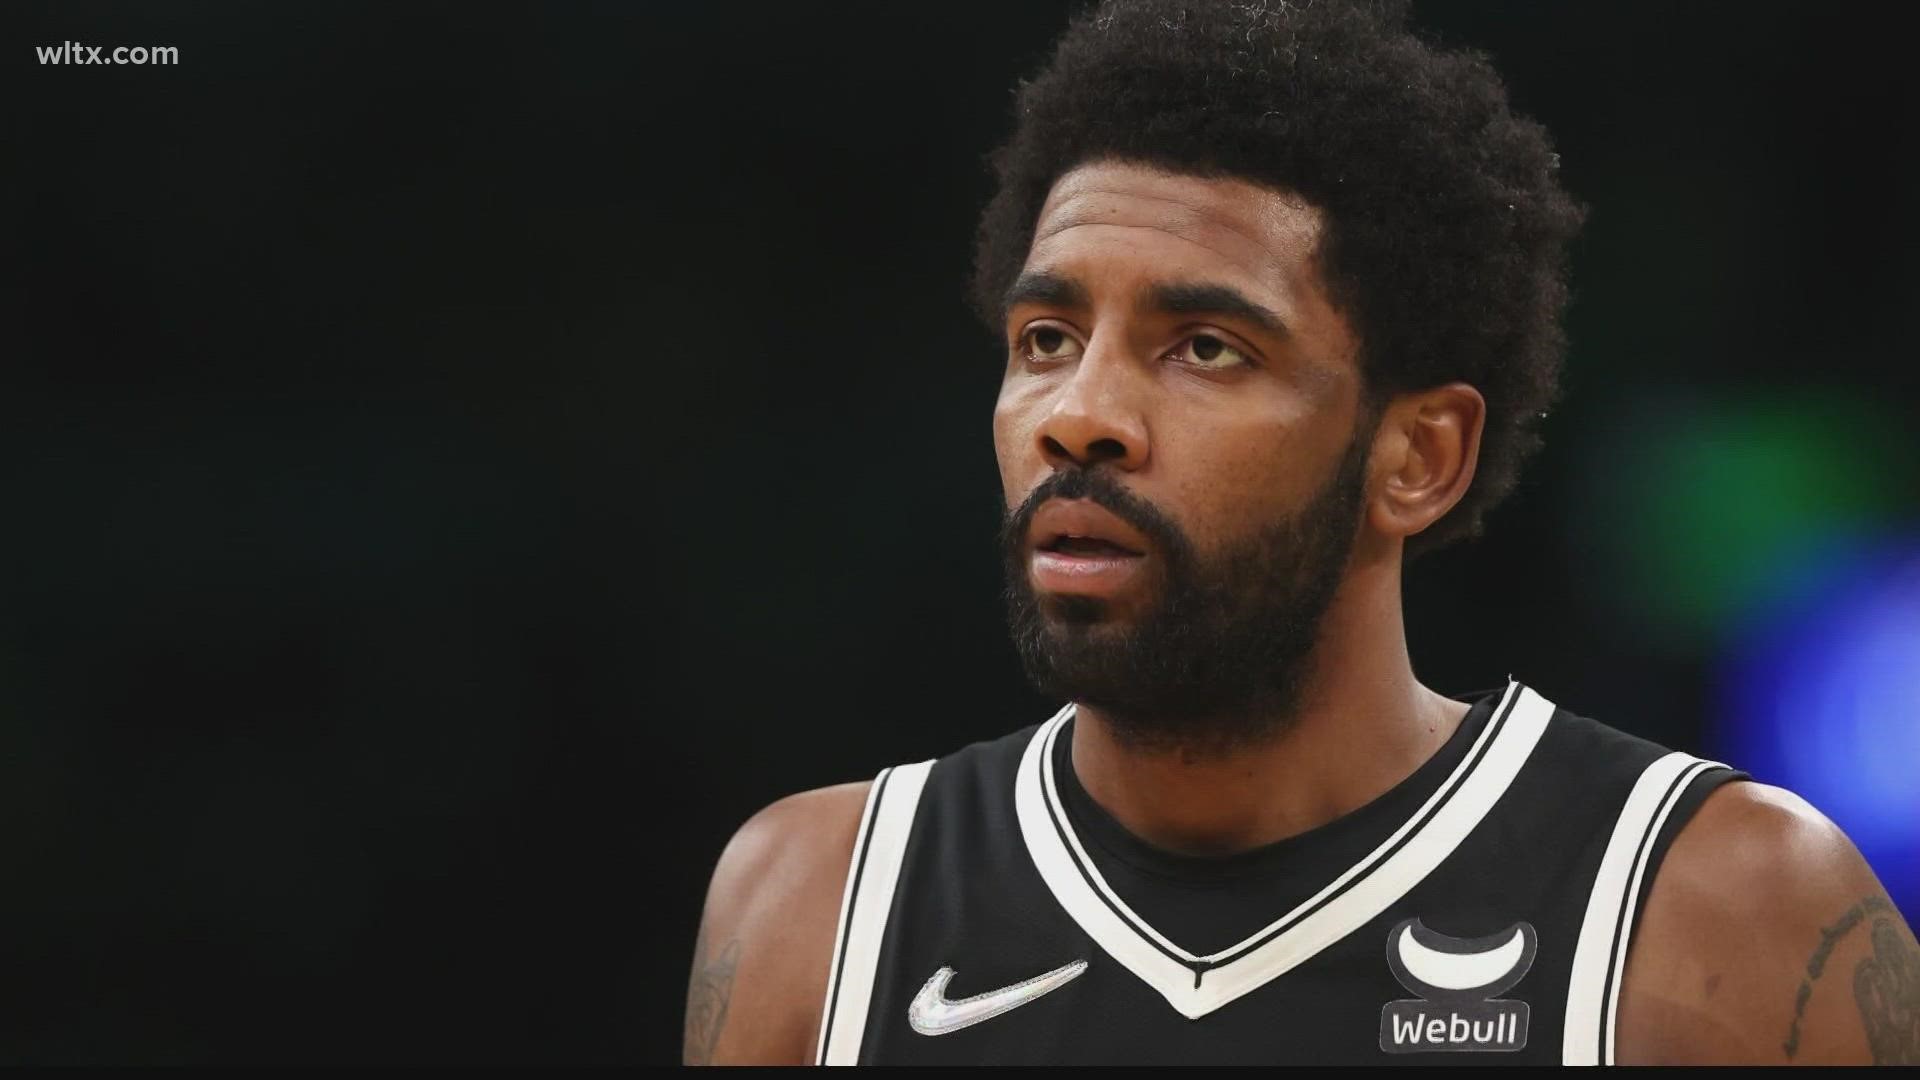 After Irving refused to apologize for sharing an antisemitic work on his Twitter feed, the team said he is is “unfit to be associated with the Brooklyn Nets."